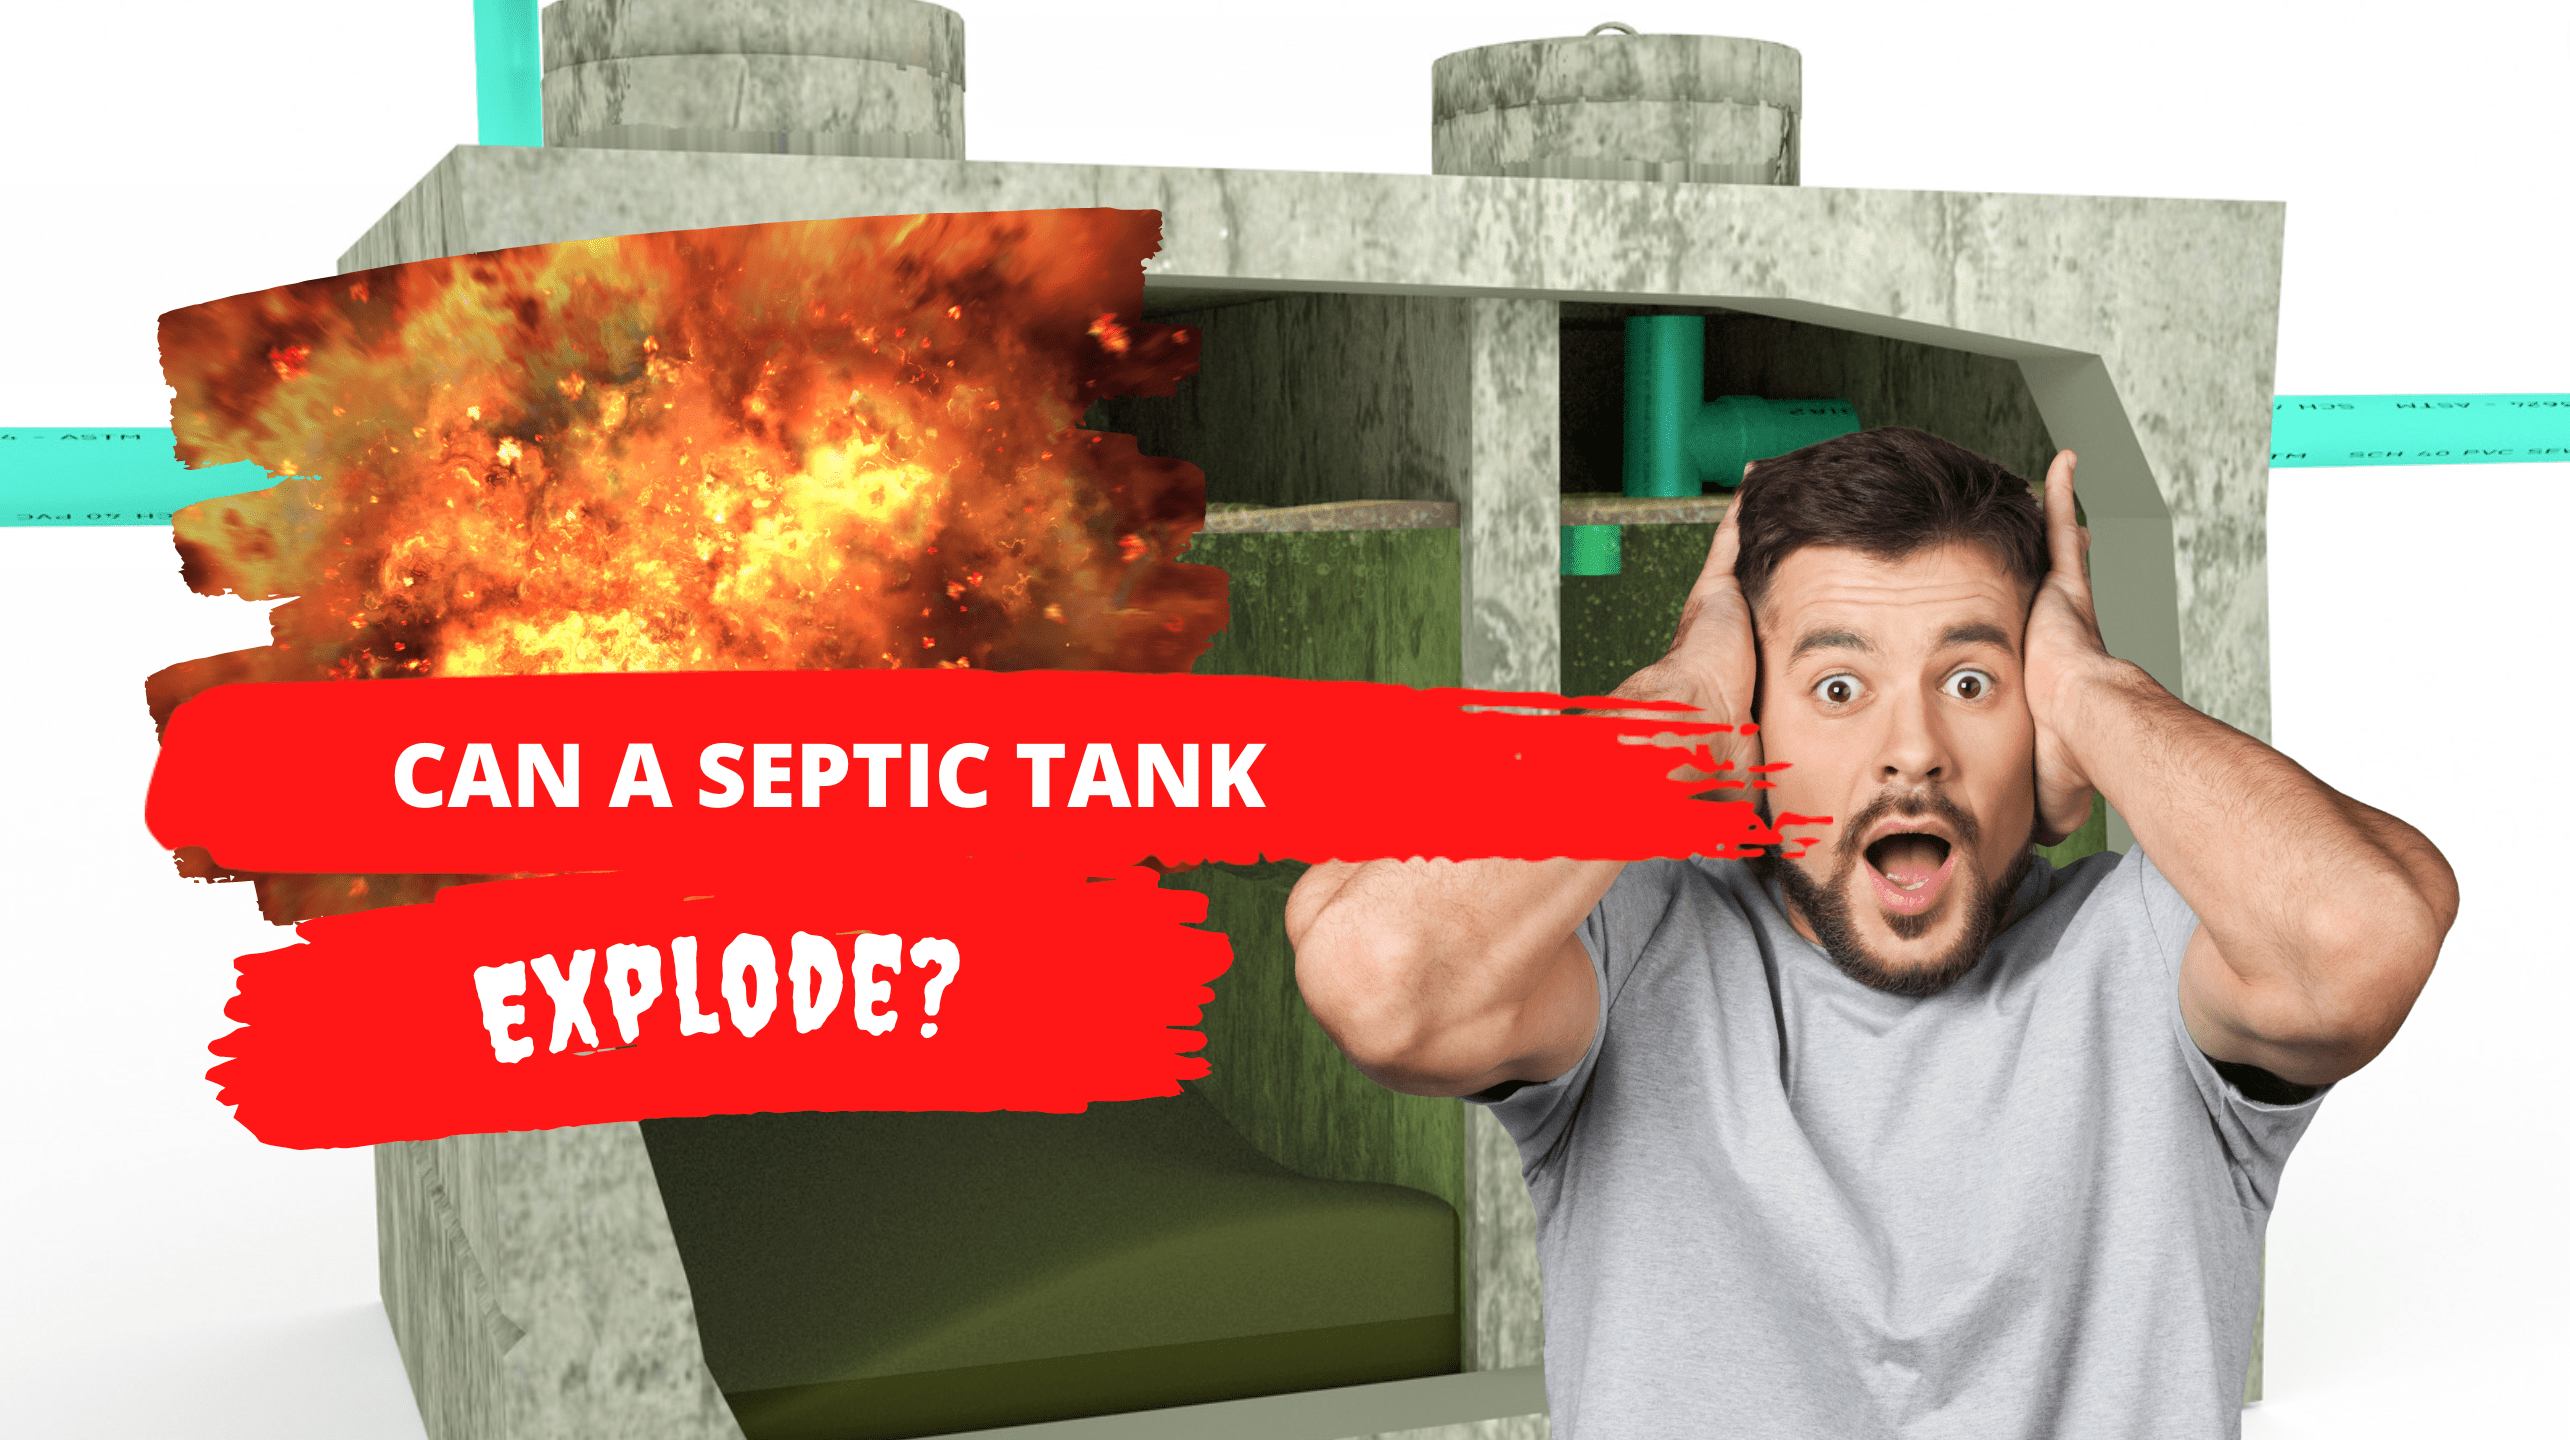 Can a Septic Tank Explode?